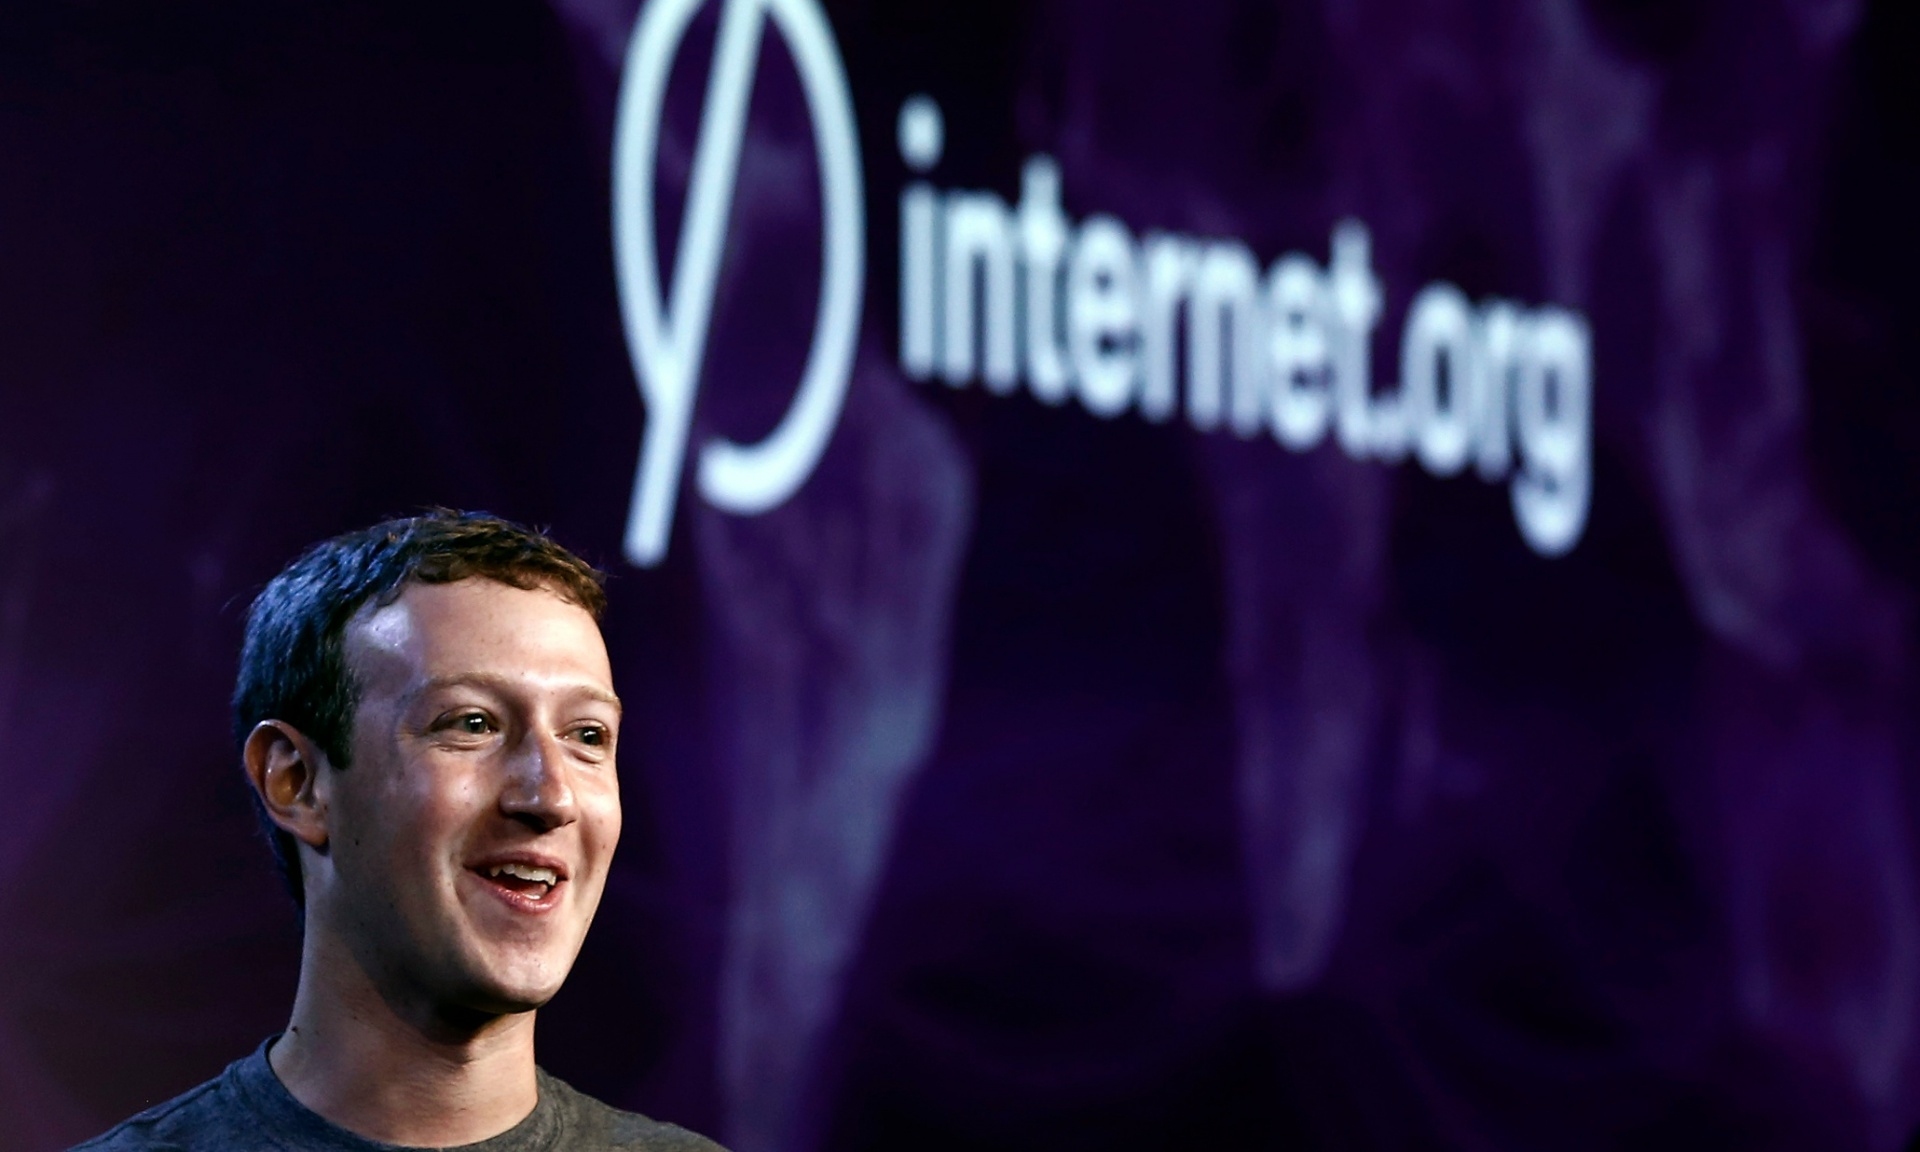 Facebook criticised for creating ‘two tier internet’ with Internet.org programme